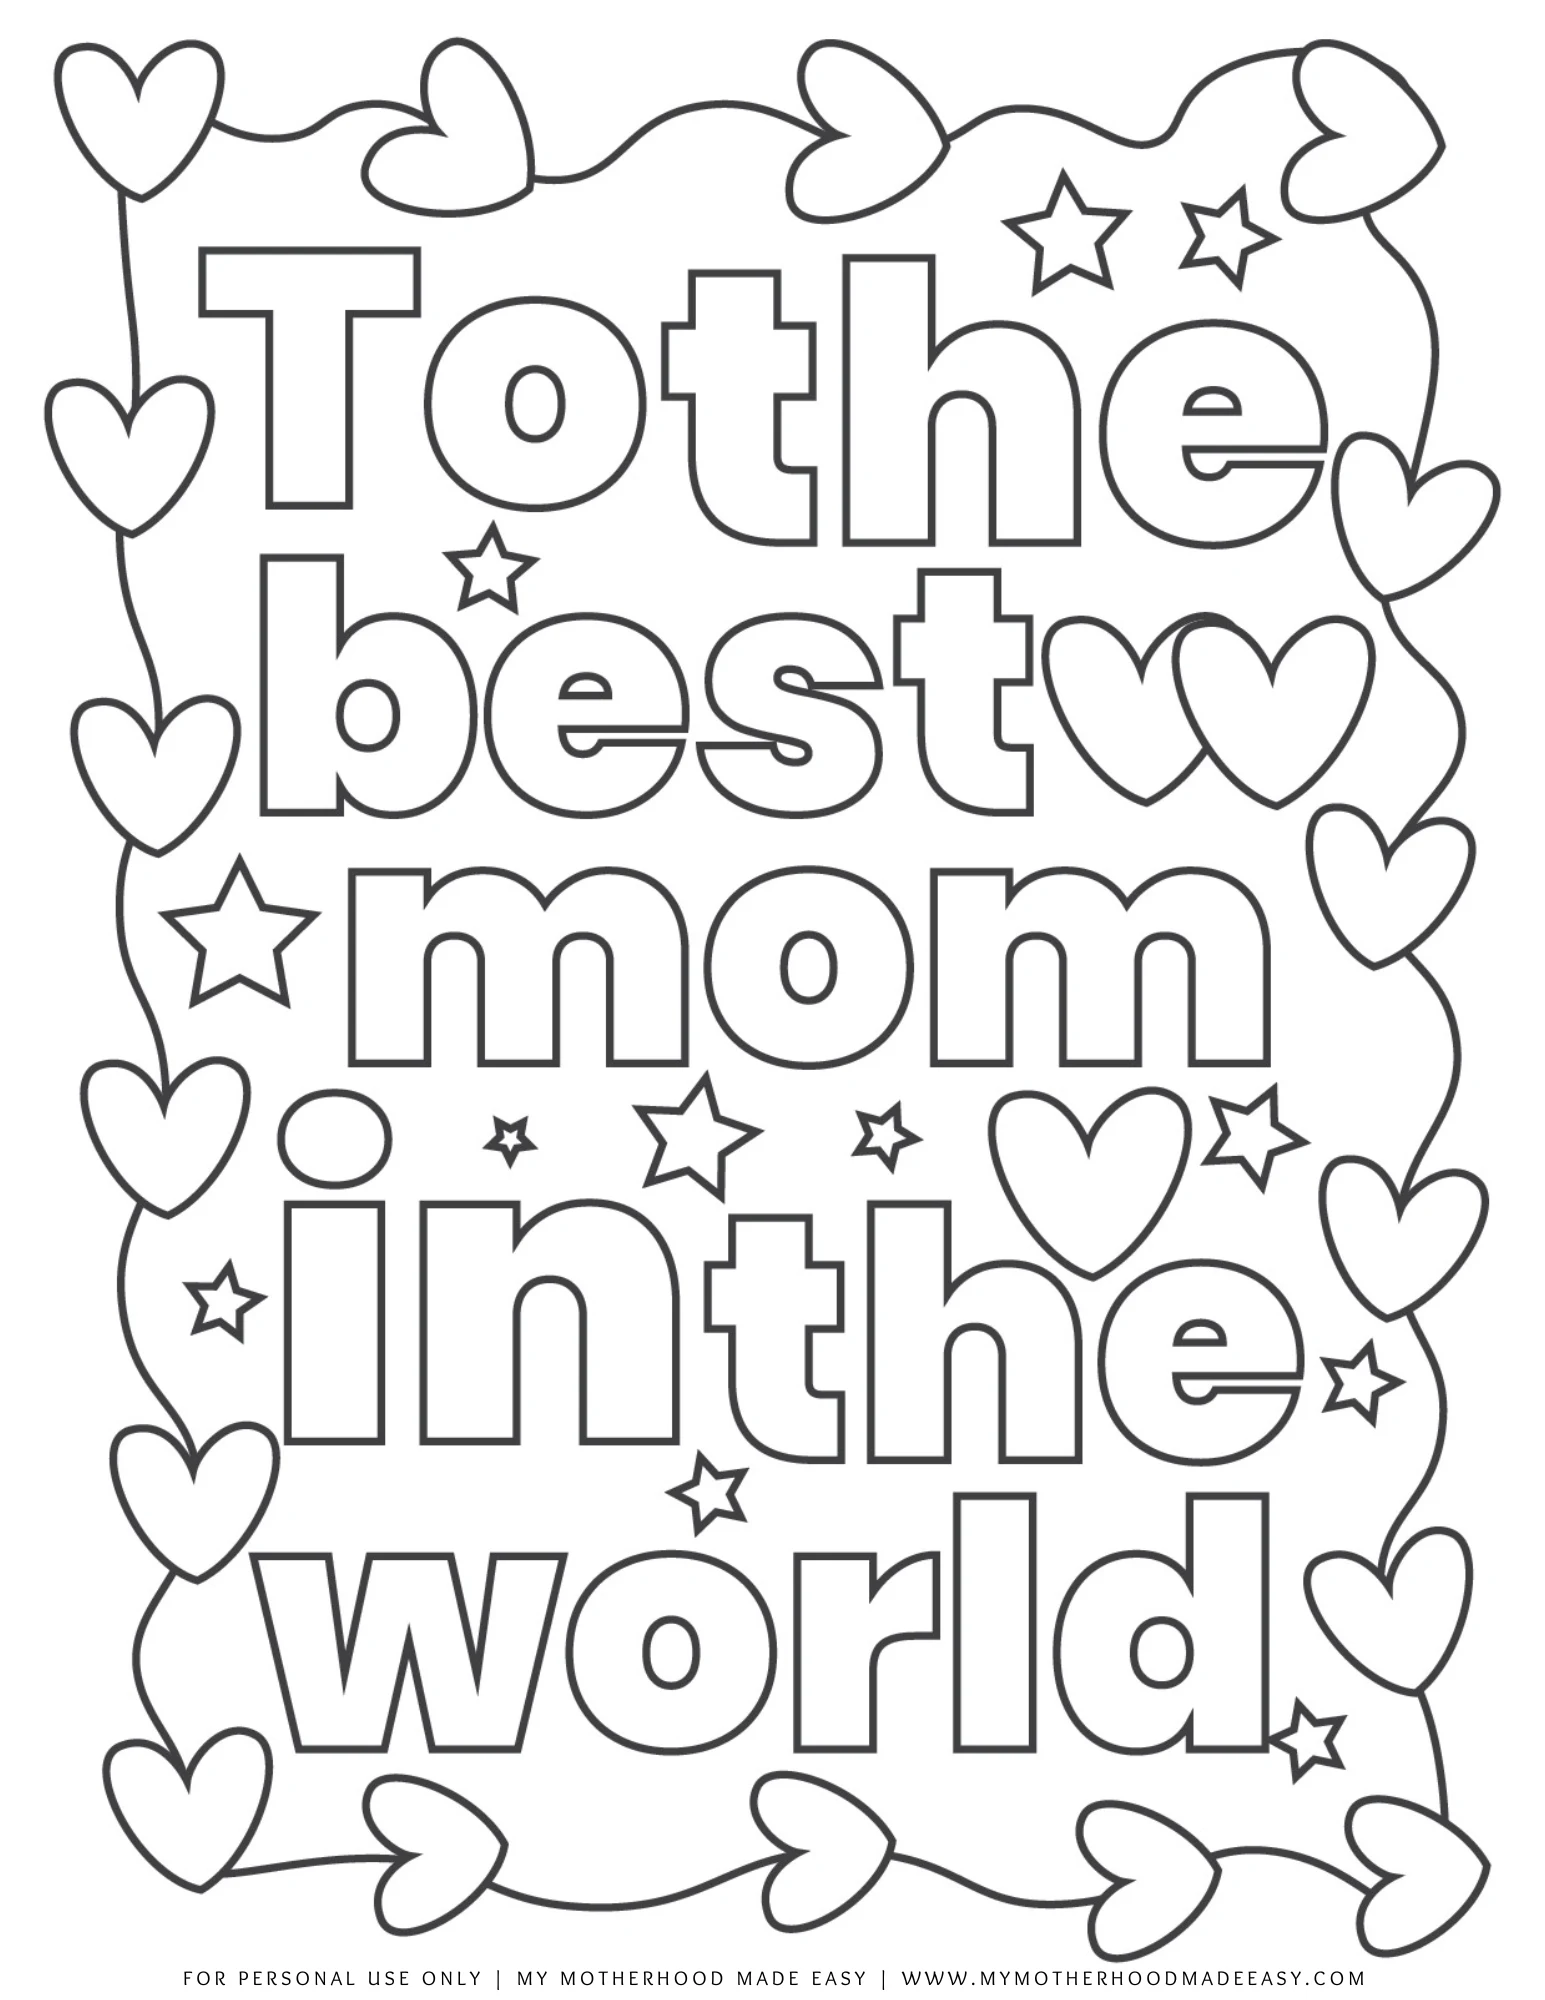 Heart Mothers day coloring pages